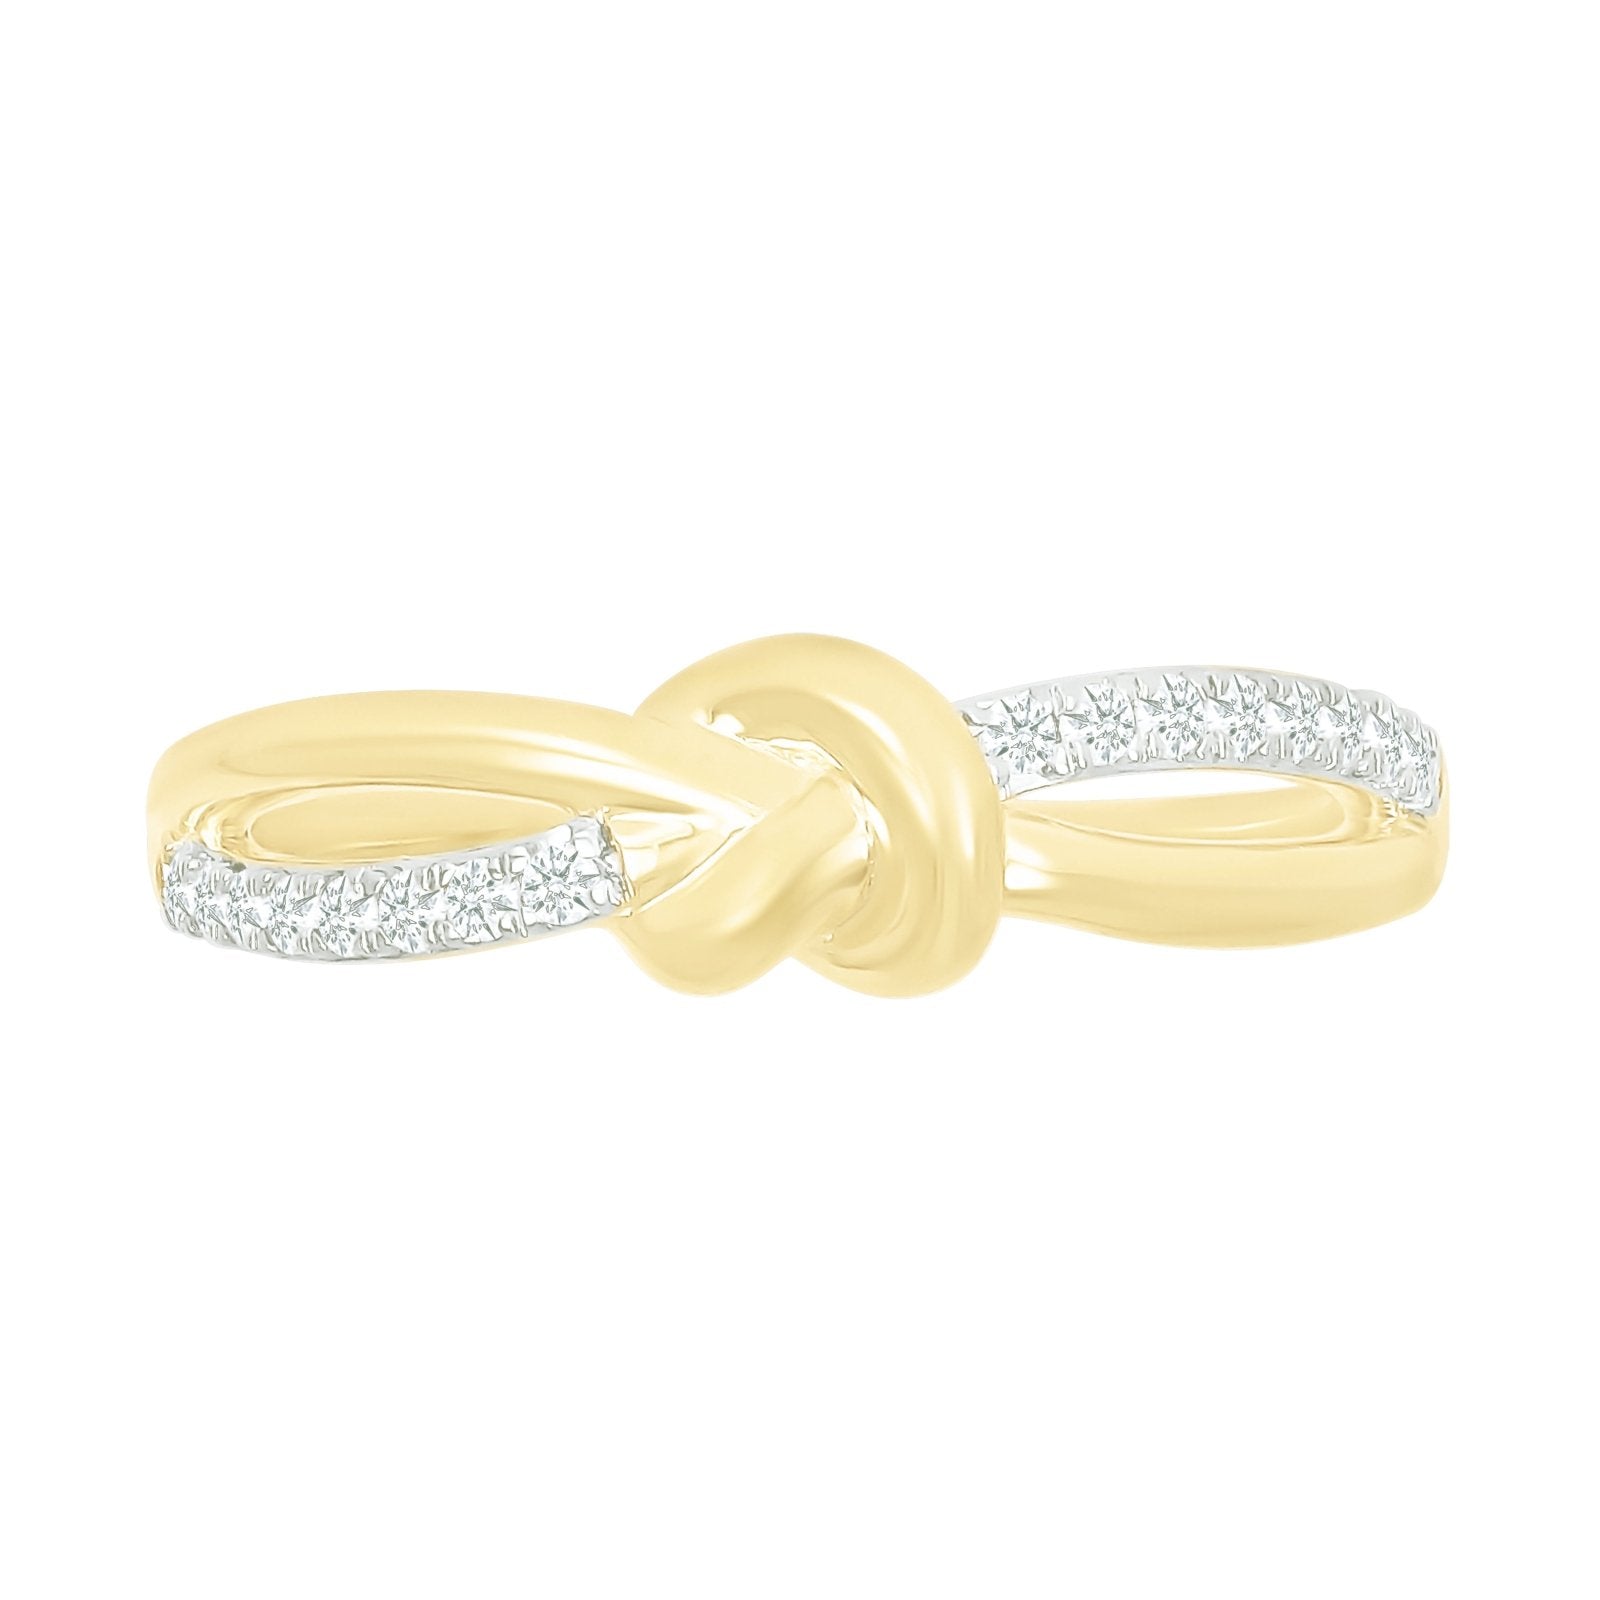 Diamond and Gold Knot Ring Rings Estella Collection #product_description# 32746 Diamond Made to Order Yellow Gold #tag4# #tag5# #tag6# #tag7# #tag8# #tag9# #tag10#